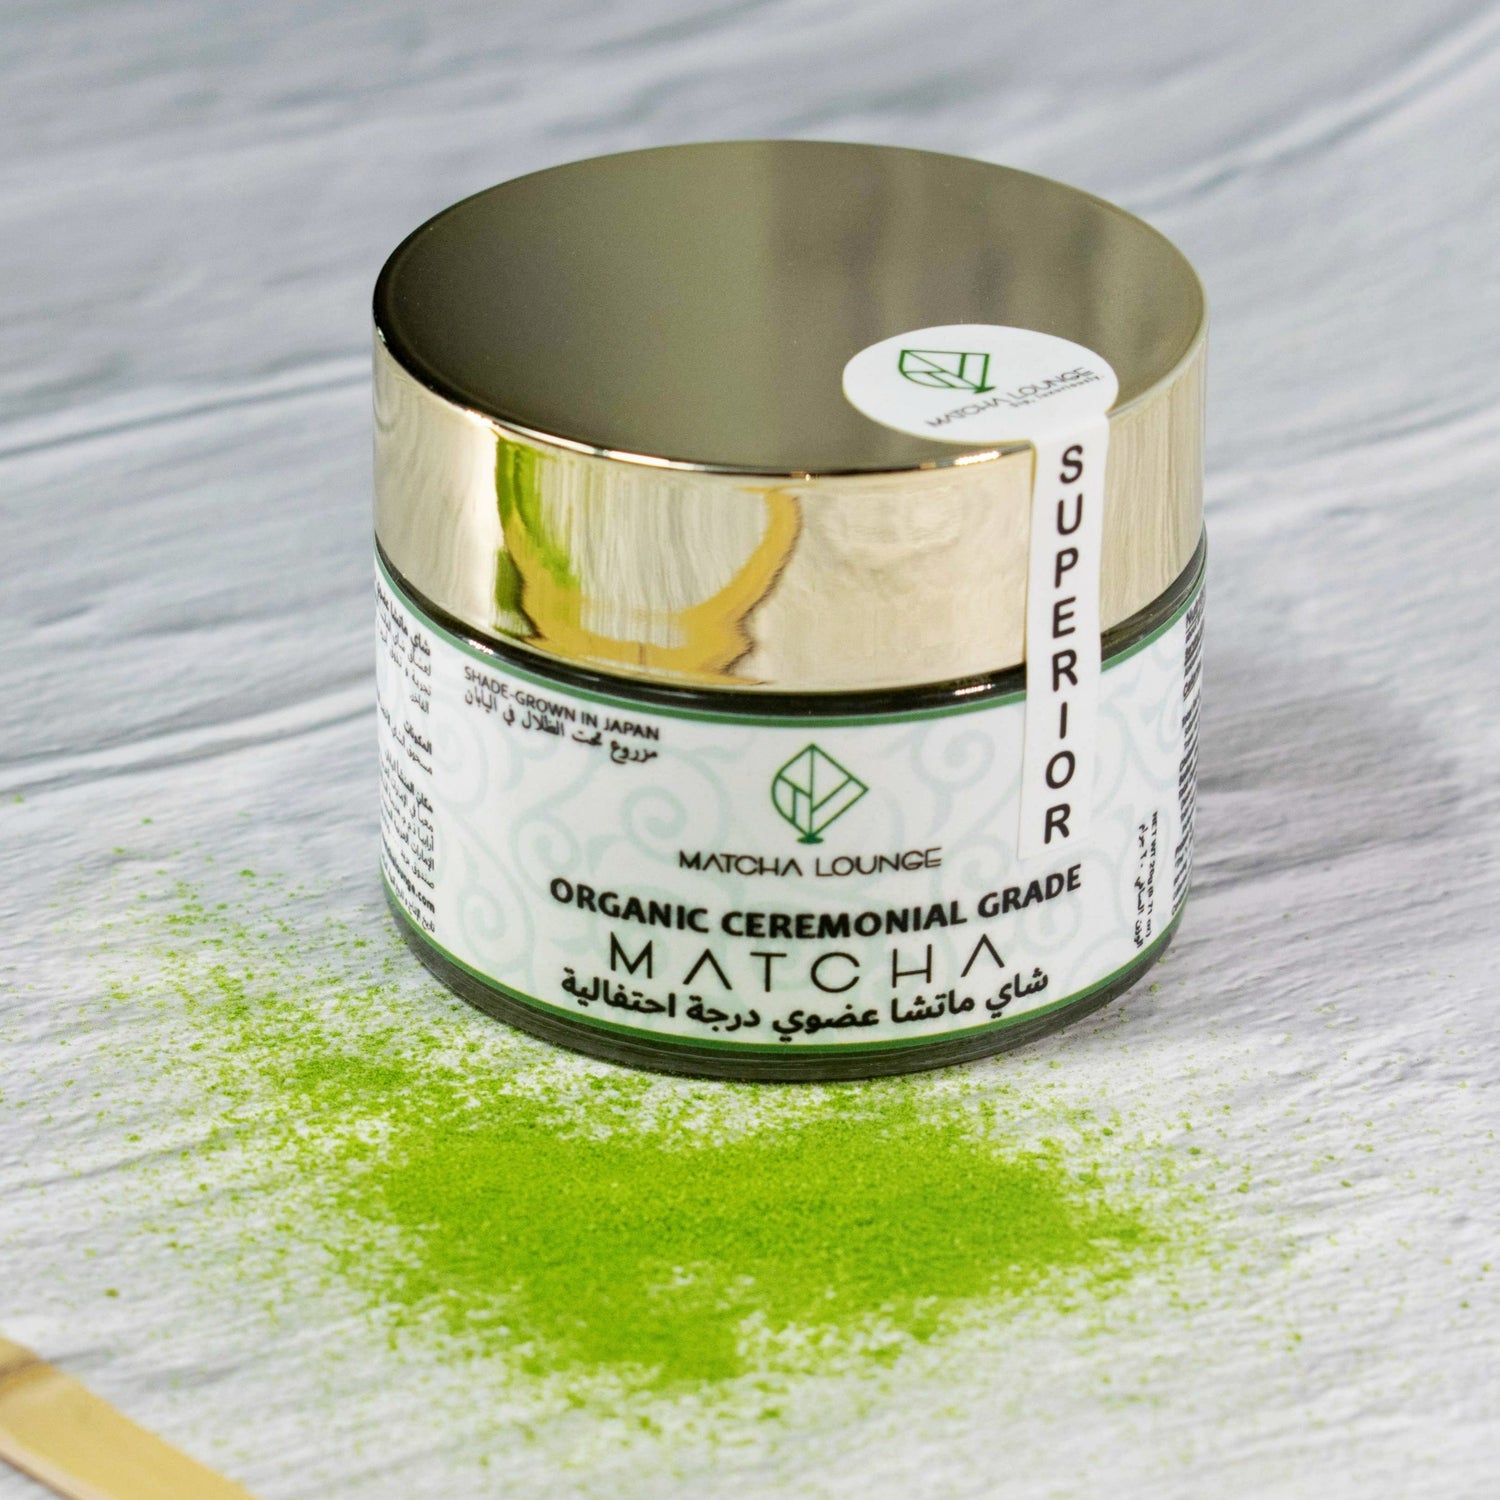 Superior in every way- taste, texture, and the vibrant green color found in only the highest quality and most exquisite ceremonial grade matcha teas in Japan. Ceremonial grade matcha, shade-grown and first harvested from the youngest leaves of the green tea plant. Delivered to you across Dubai and the UAE.